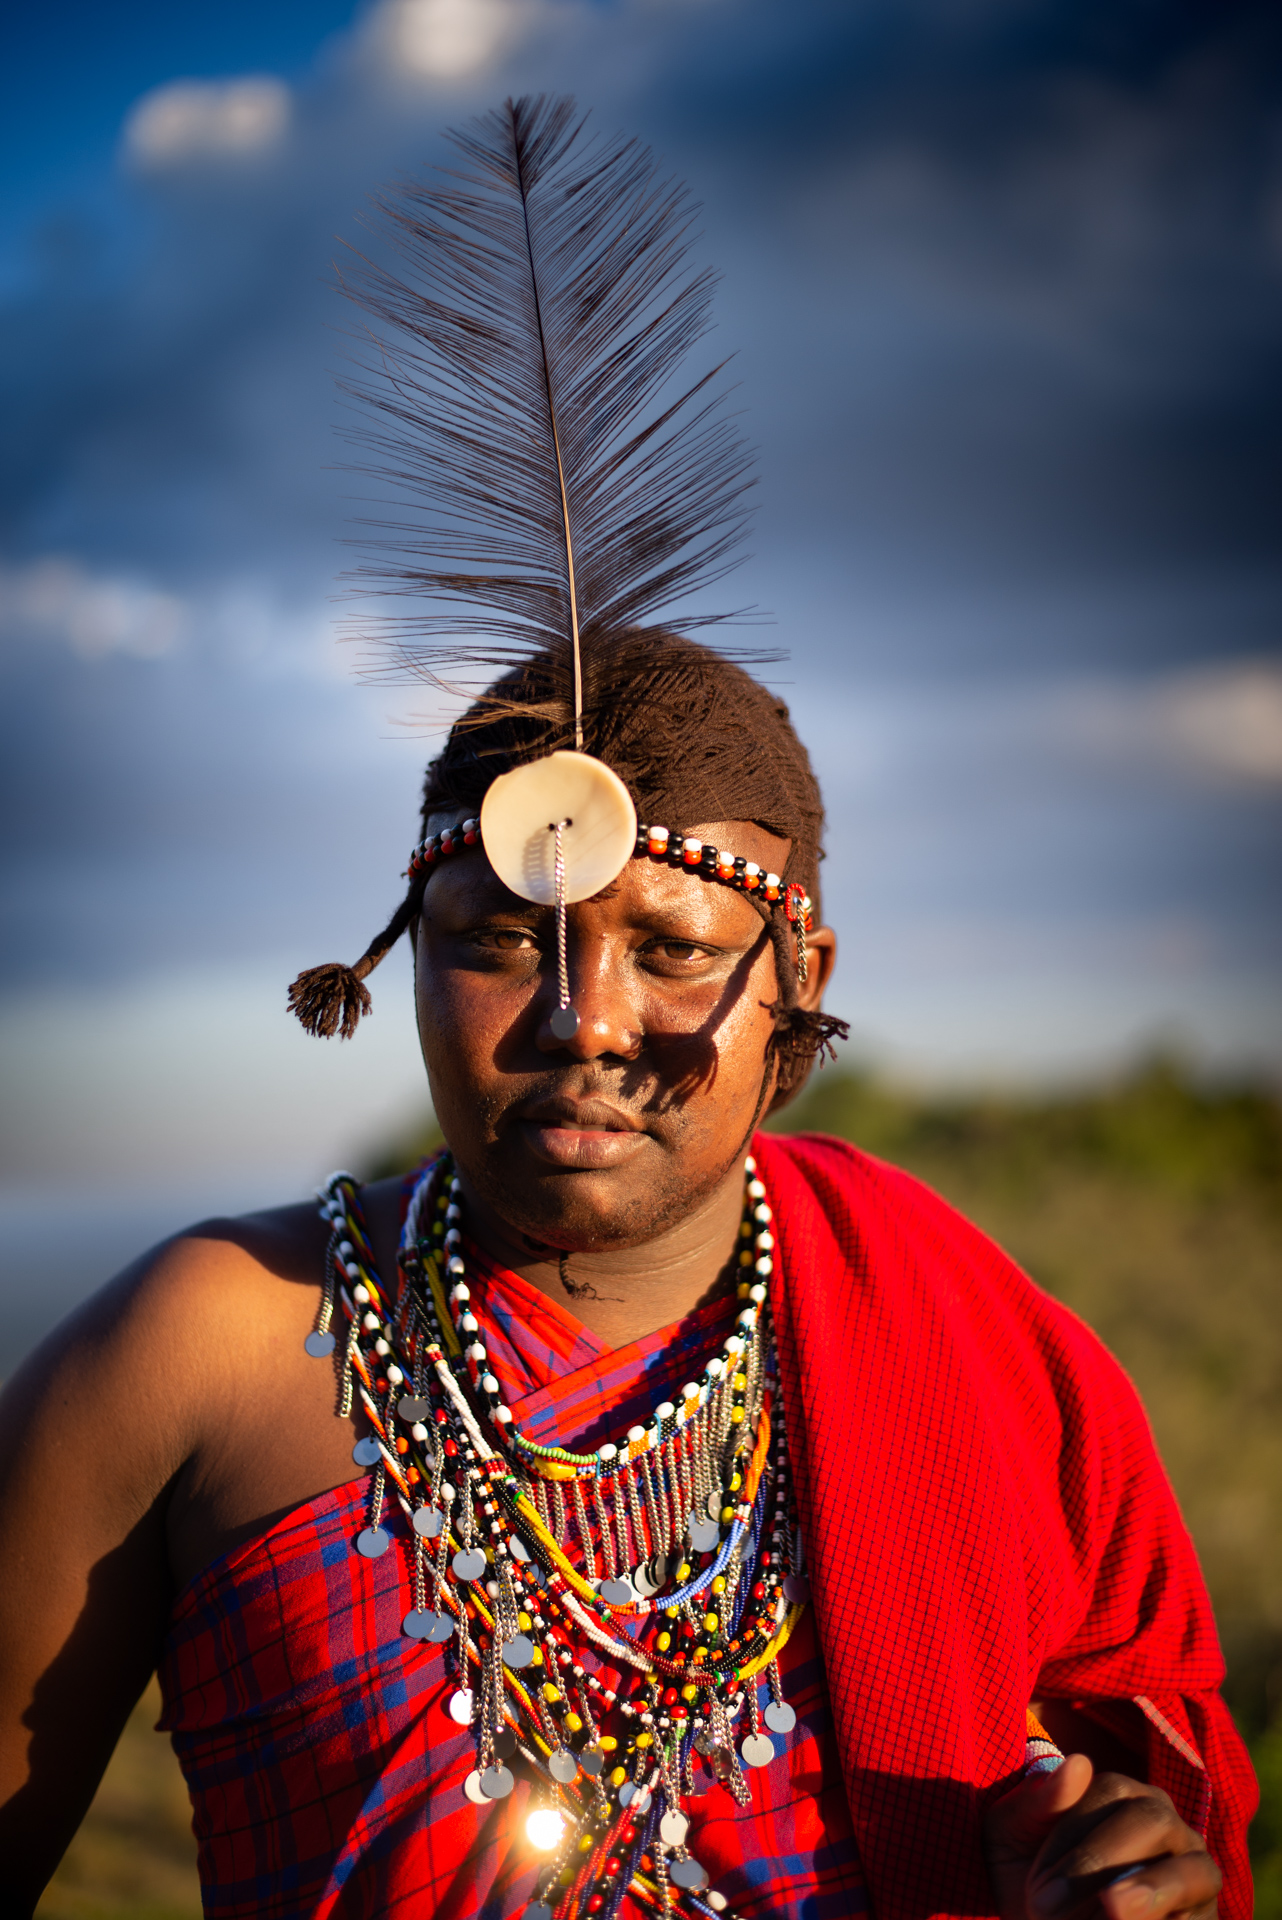 You will still find natural elements like the shell and feather in Nasiti's headdress 